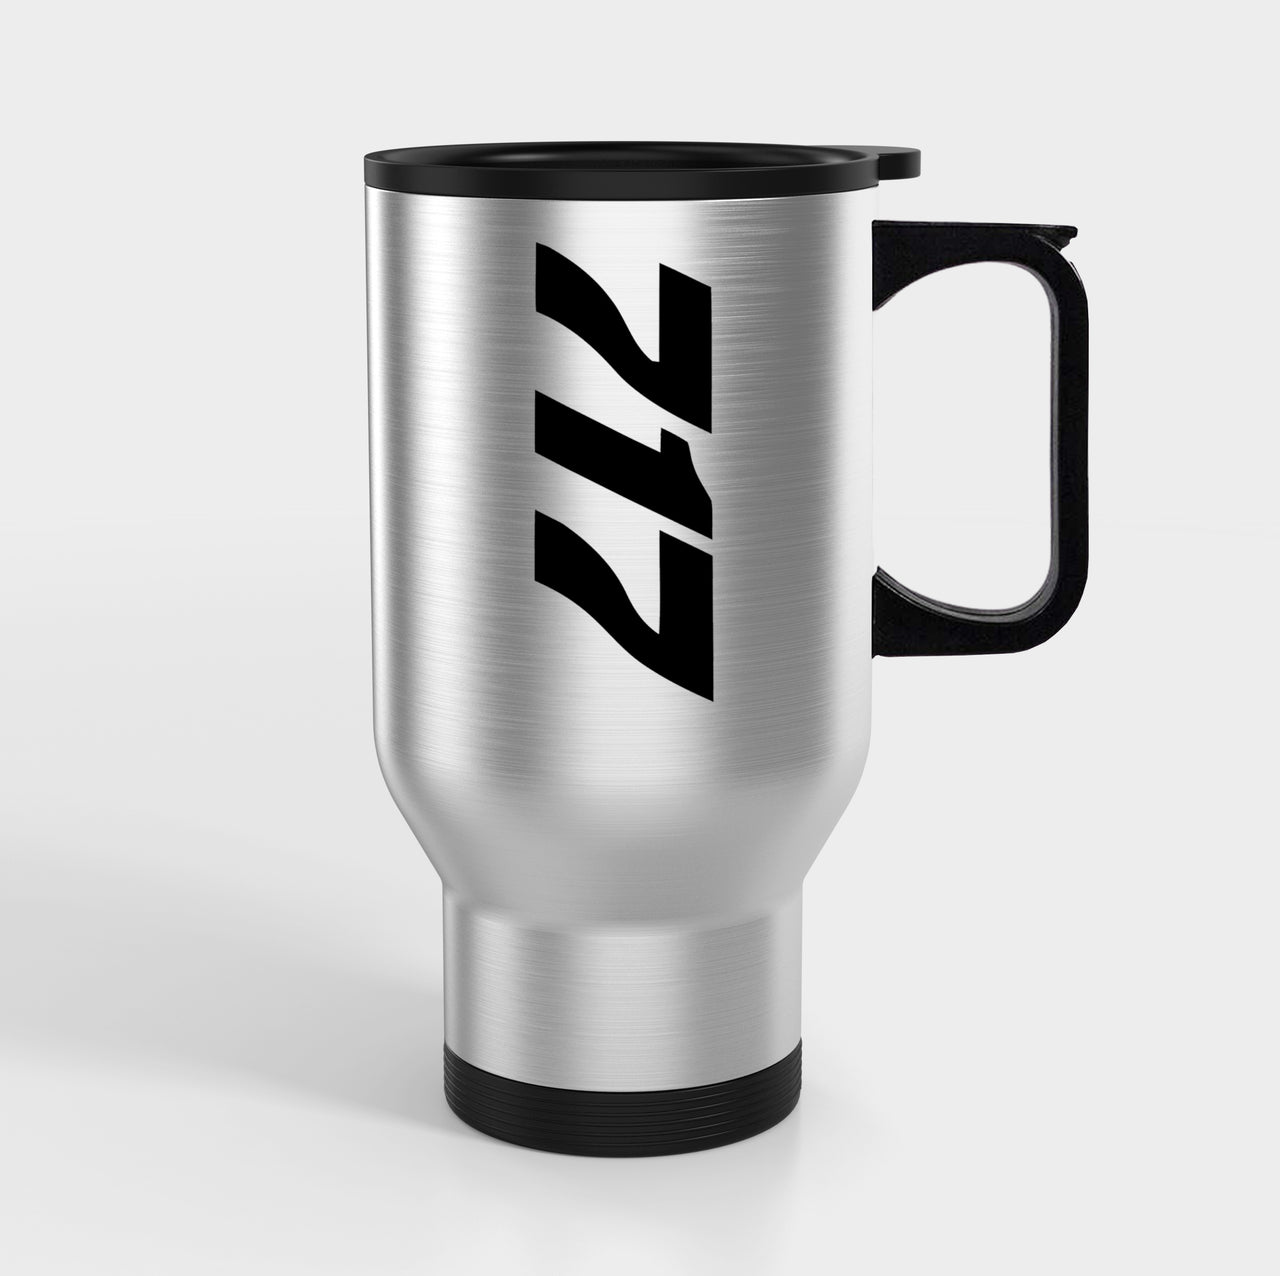 Boeing 717 Text Side Designed Travel Mugs (With Holder)